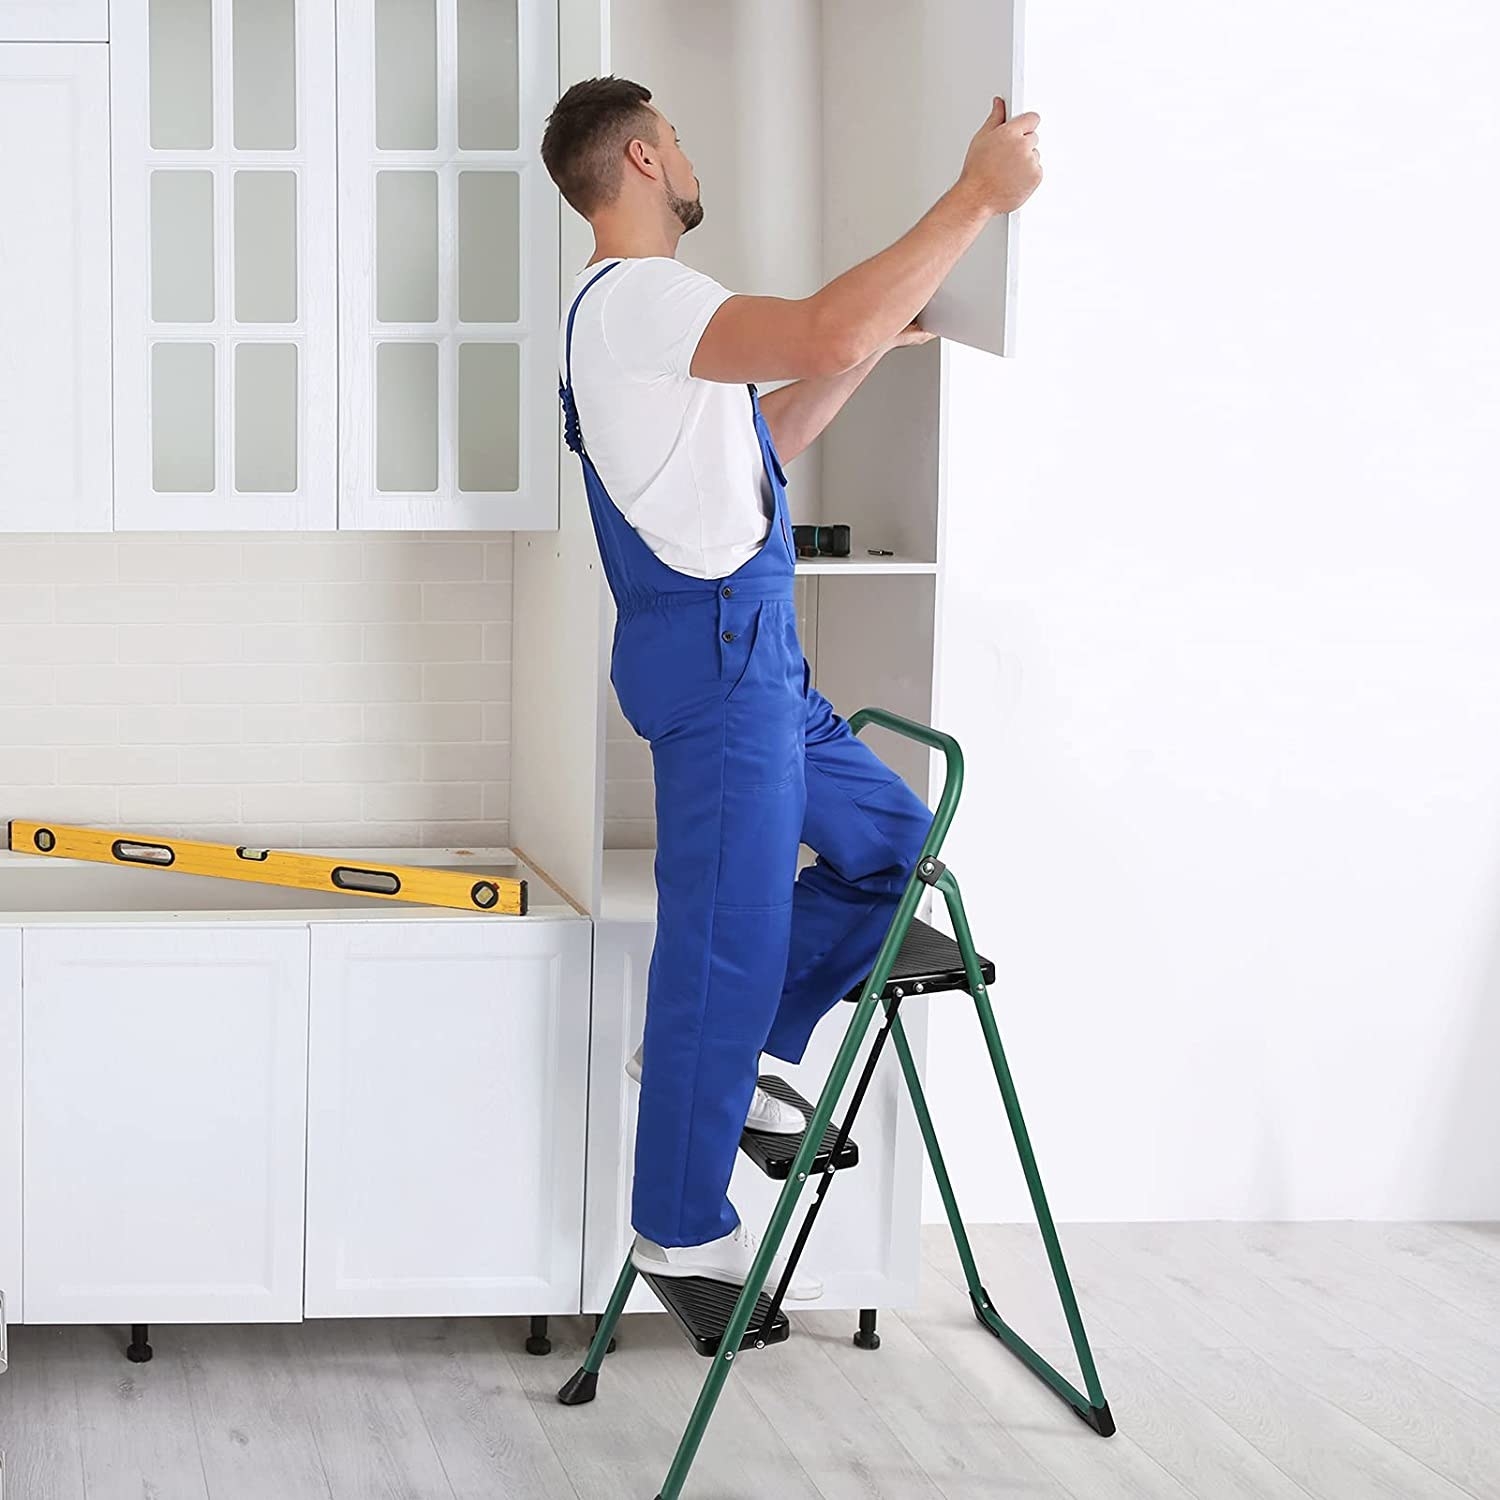 a model steps on the step ladder to install a cabinet door in a kitchen